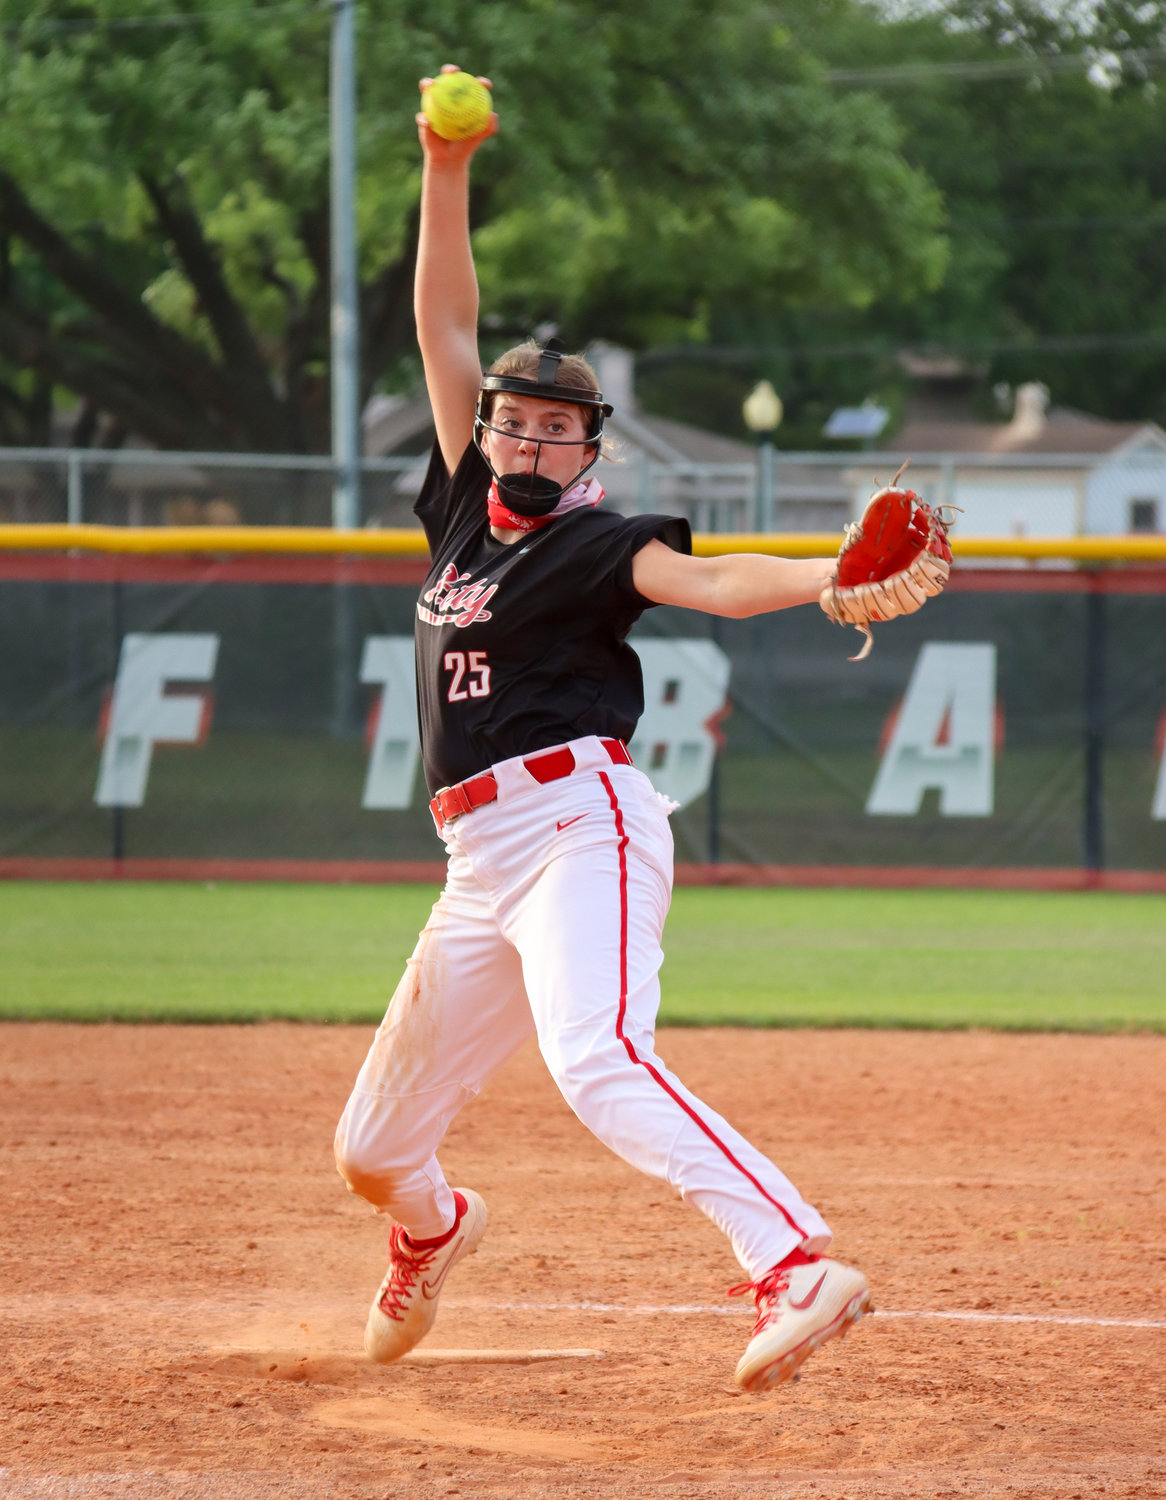 Katy High freshman Cameryn Harrison (25) delivers a pitch during a game against Cinco Ranch on Tuesday, April 6, at Katy High.